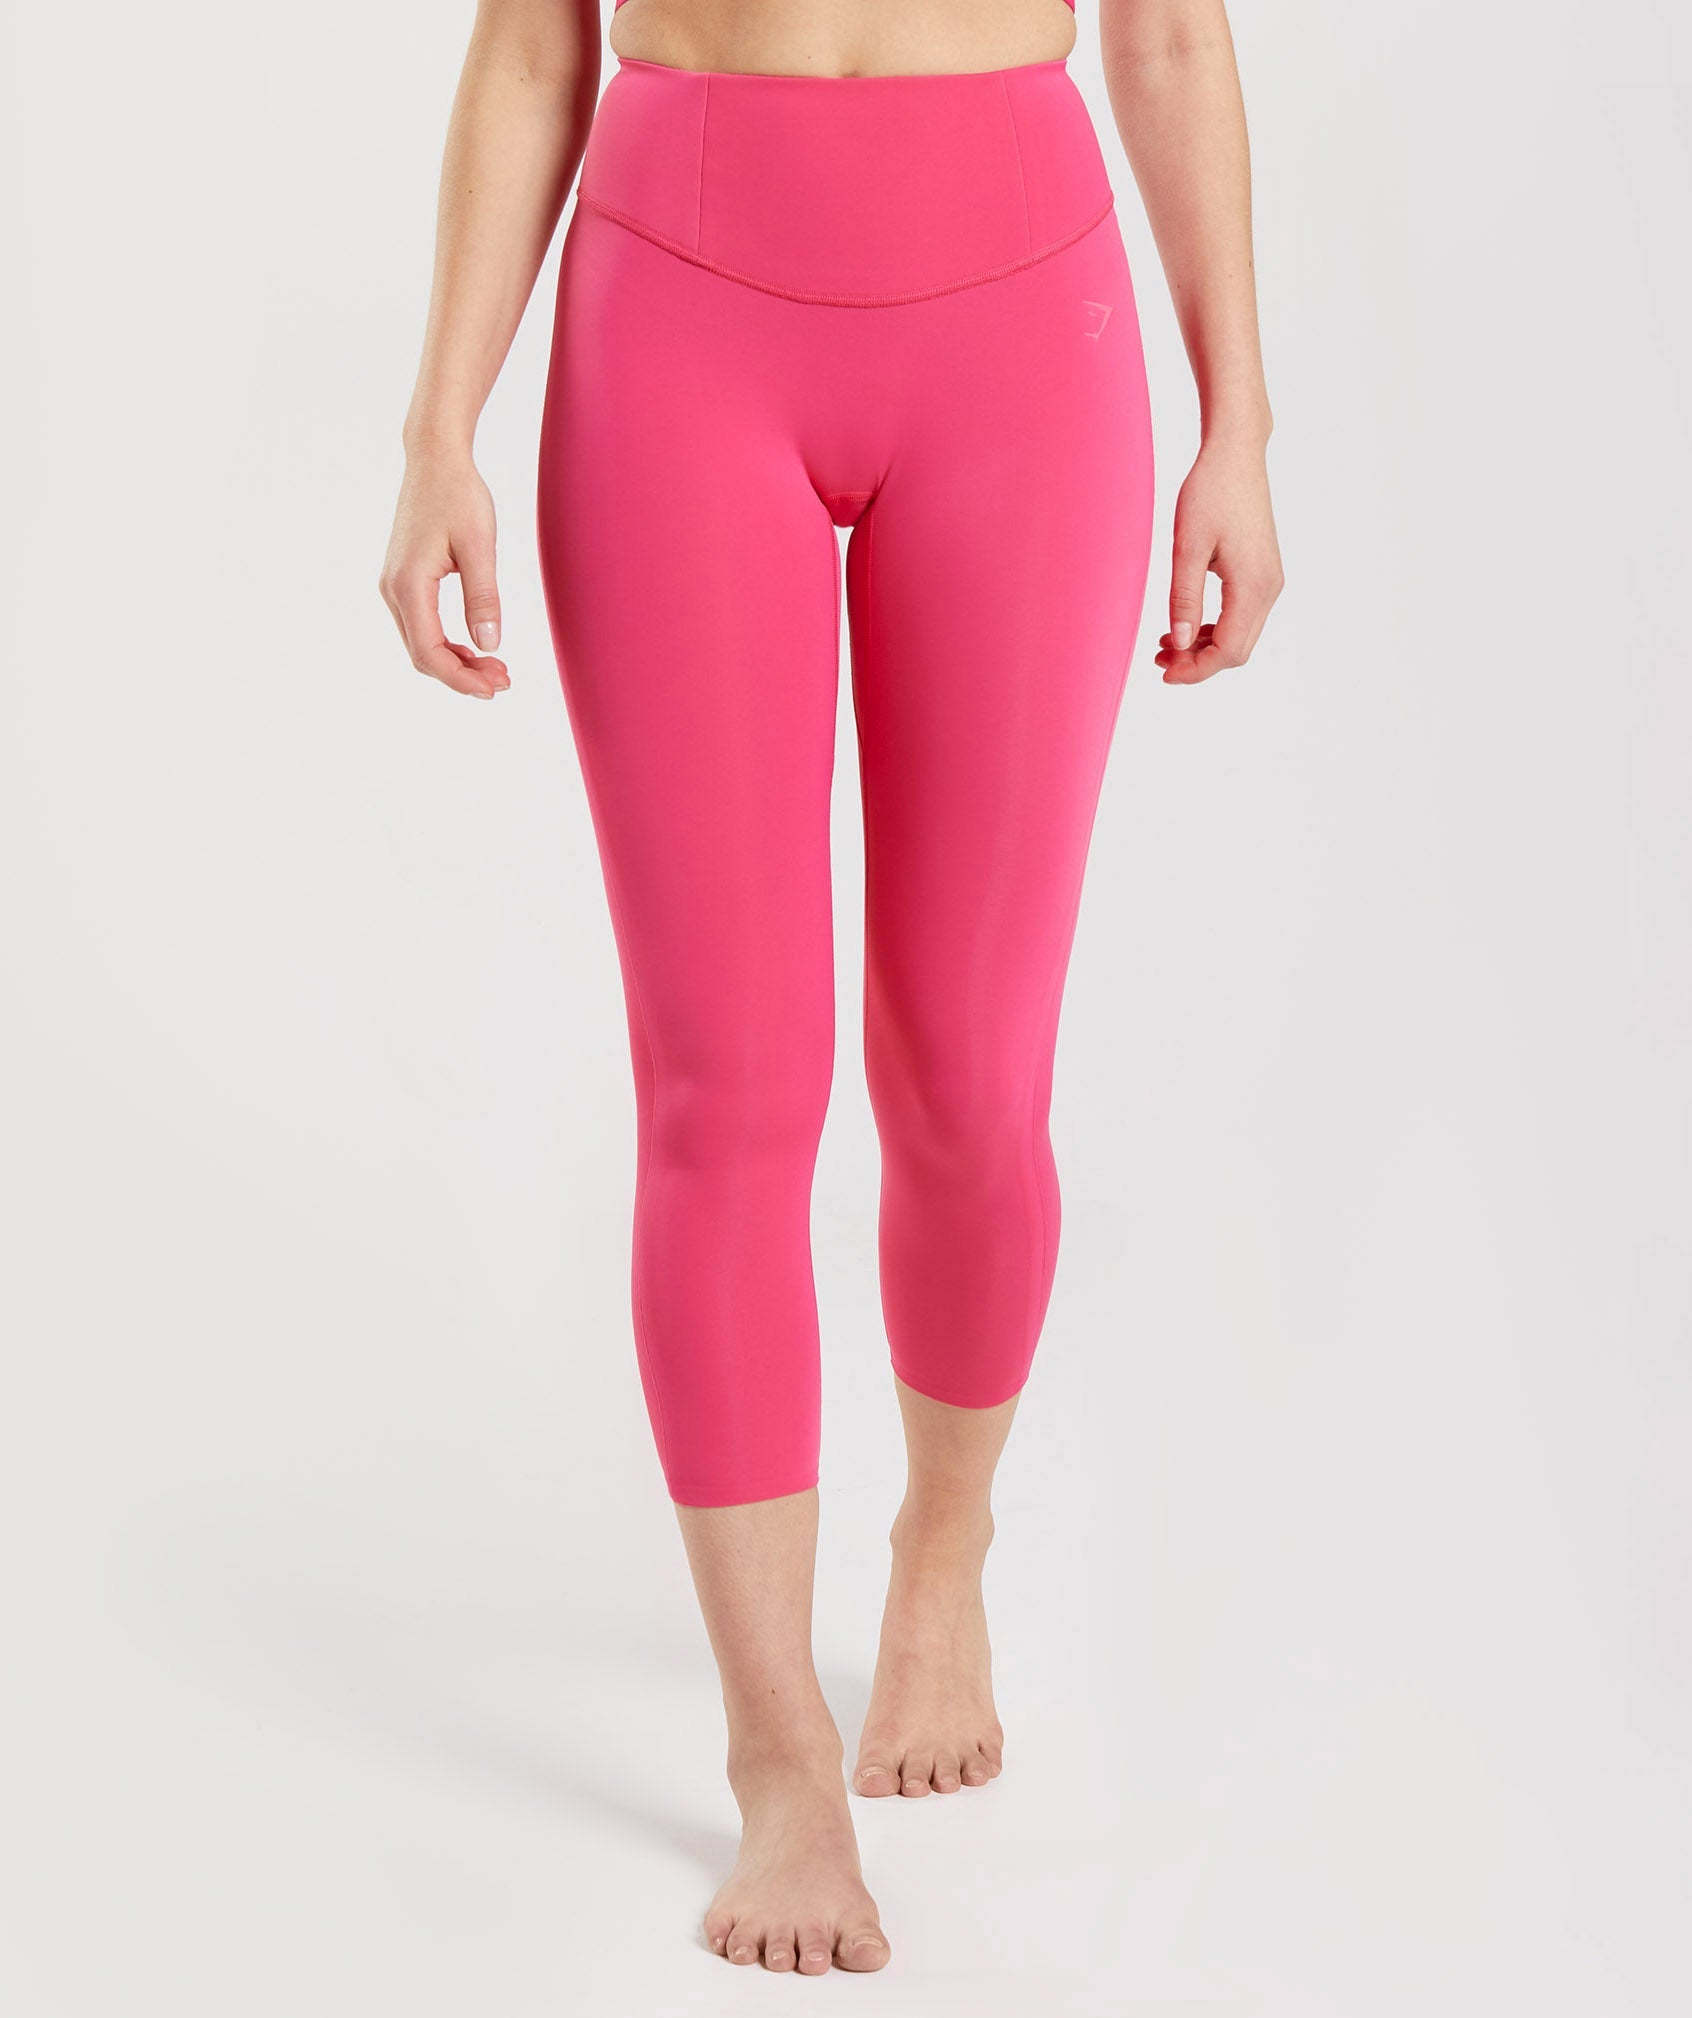 Buy Pink Leggings for Women by Groversons Paris Beauty Online